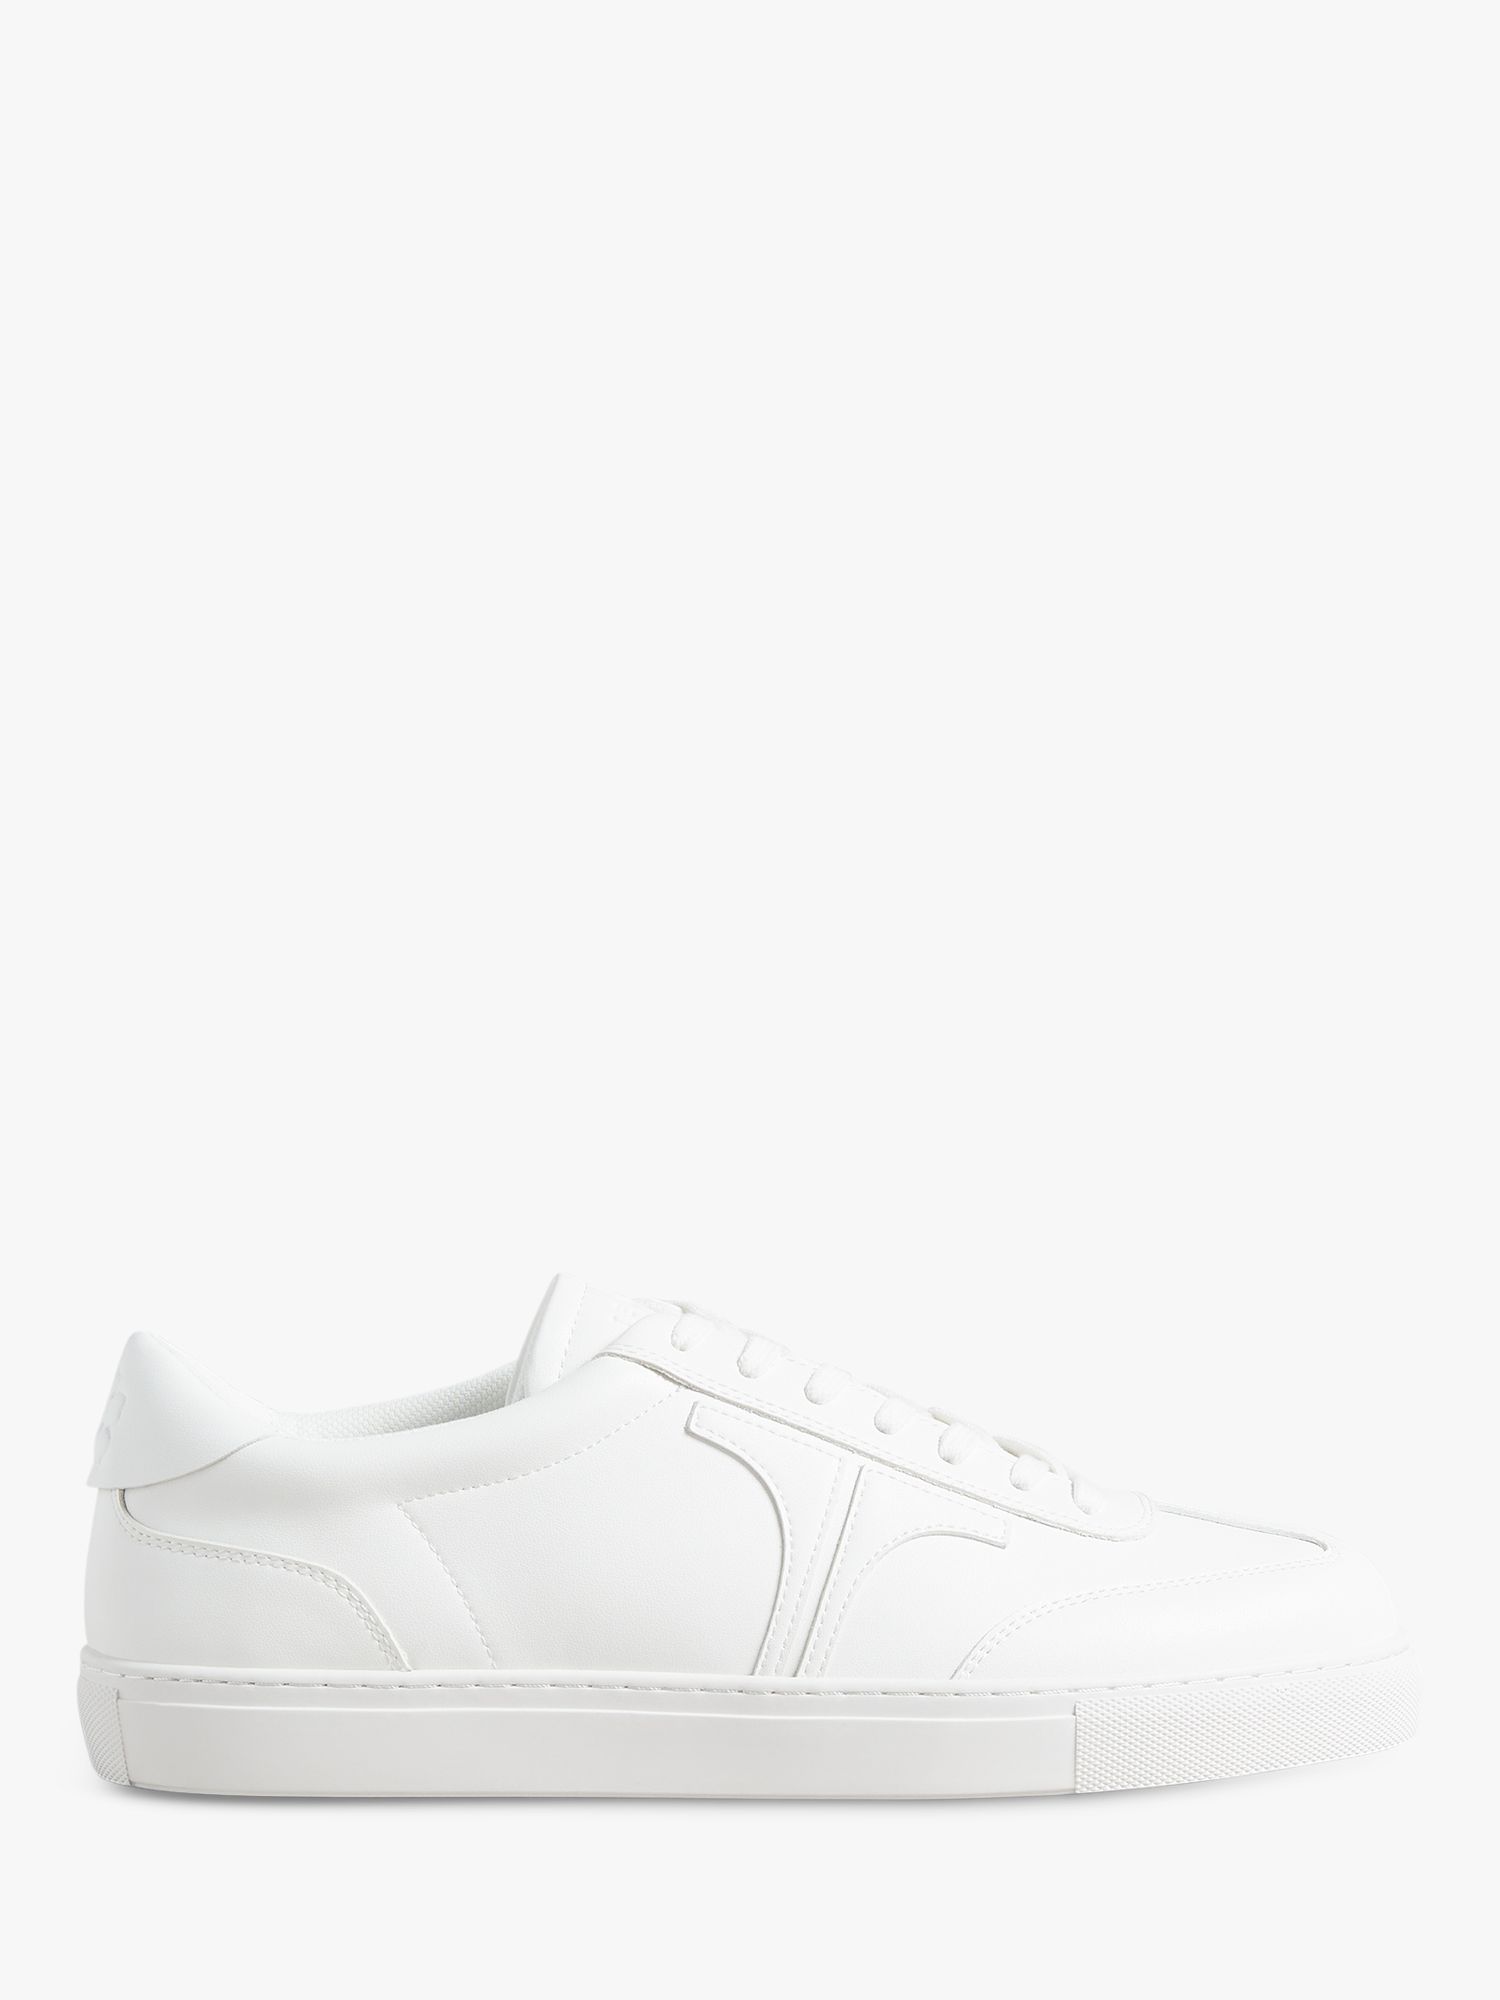 Ted Baker Robertt Leather Retro Trainers, White, 6